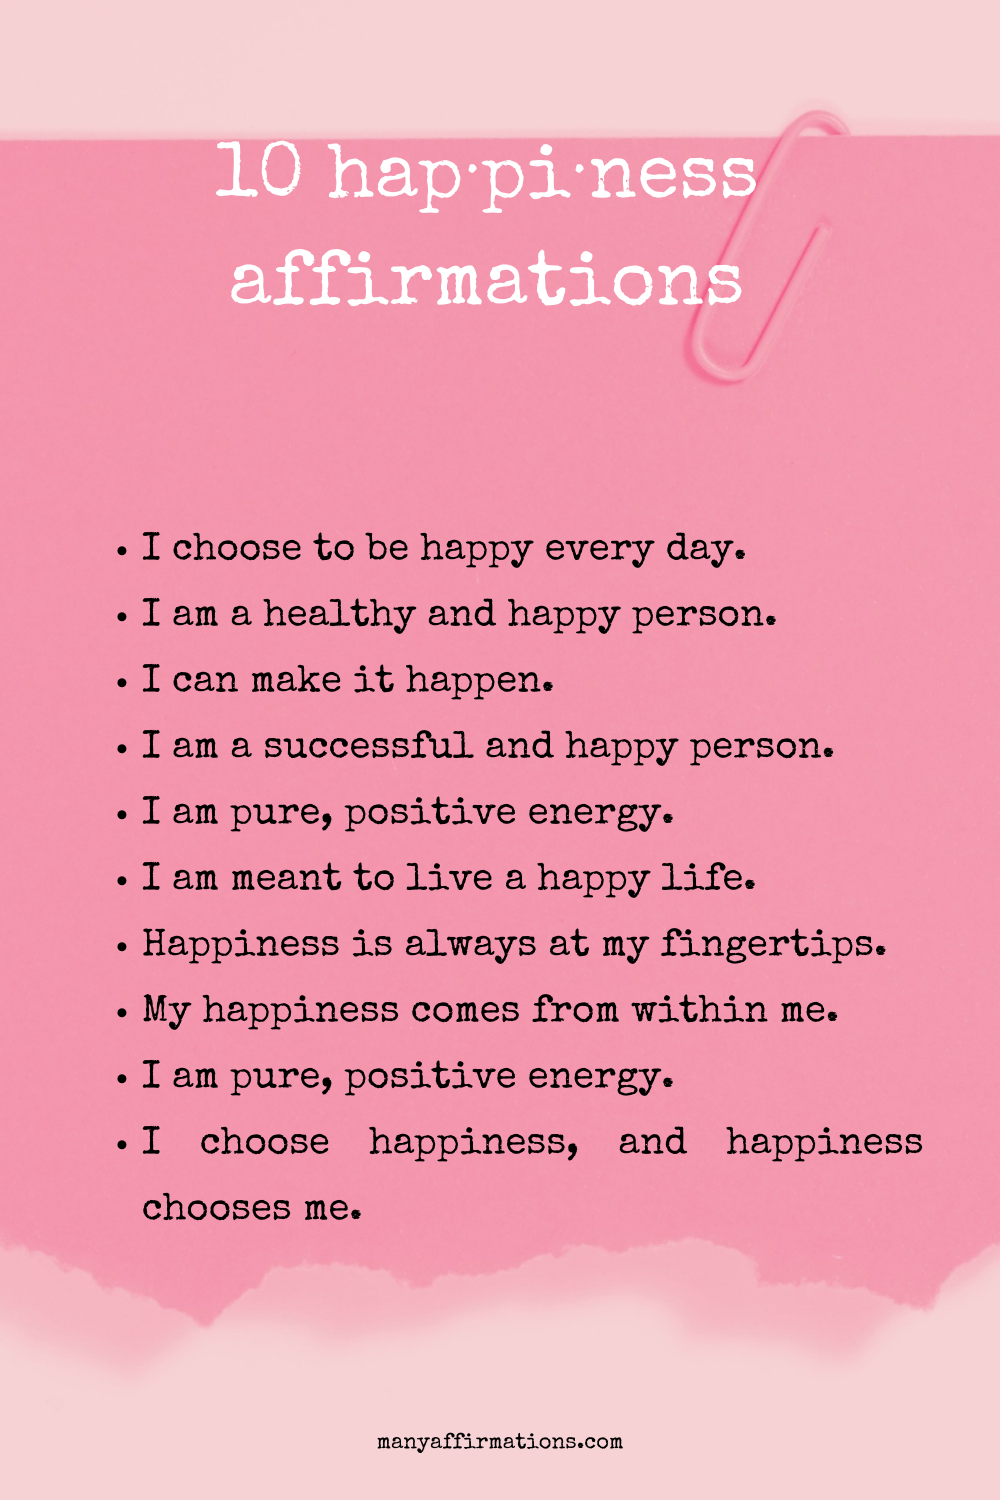 affirmations pin